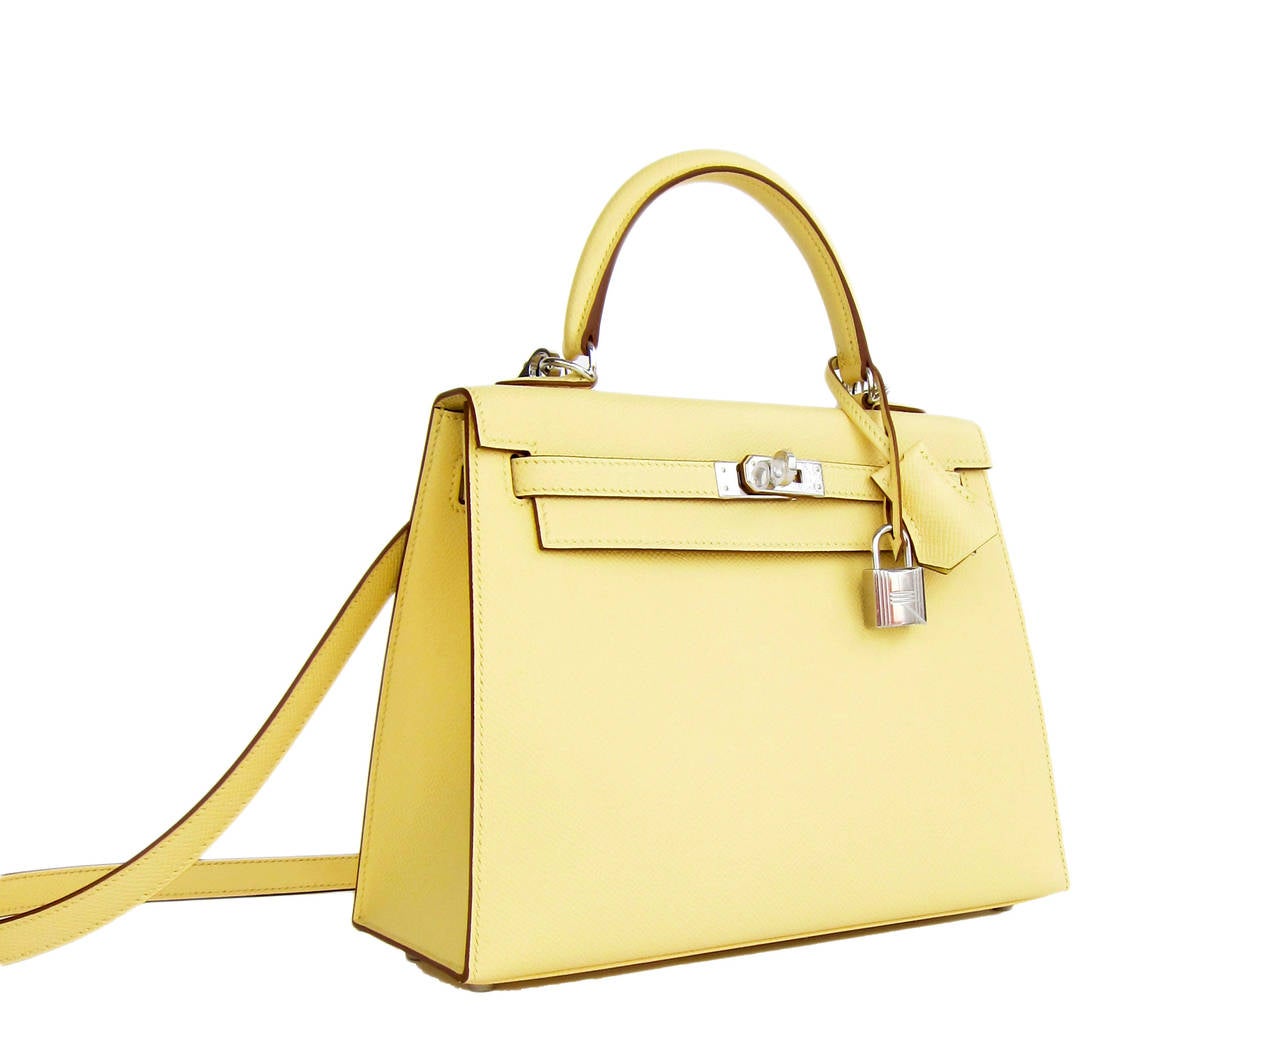 Hermes 25cm Jaune Poussin Sellier Epsom Kelly Palladium Jewel

Brand New in Box- T stamp
Comes full set with keys, lock, clochette, shoulder strap, a sleeper for the bag, rain protector, Hermes ribbon, and original box.
Jaune Poussin is an